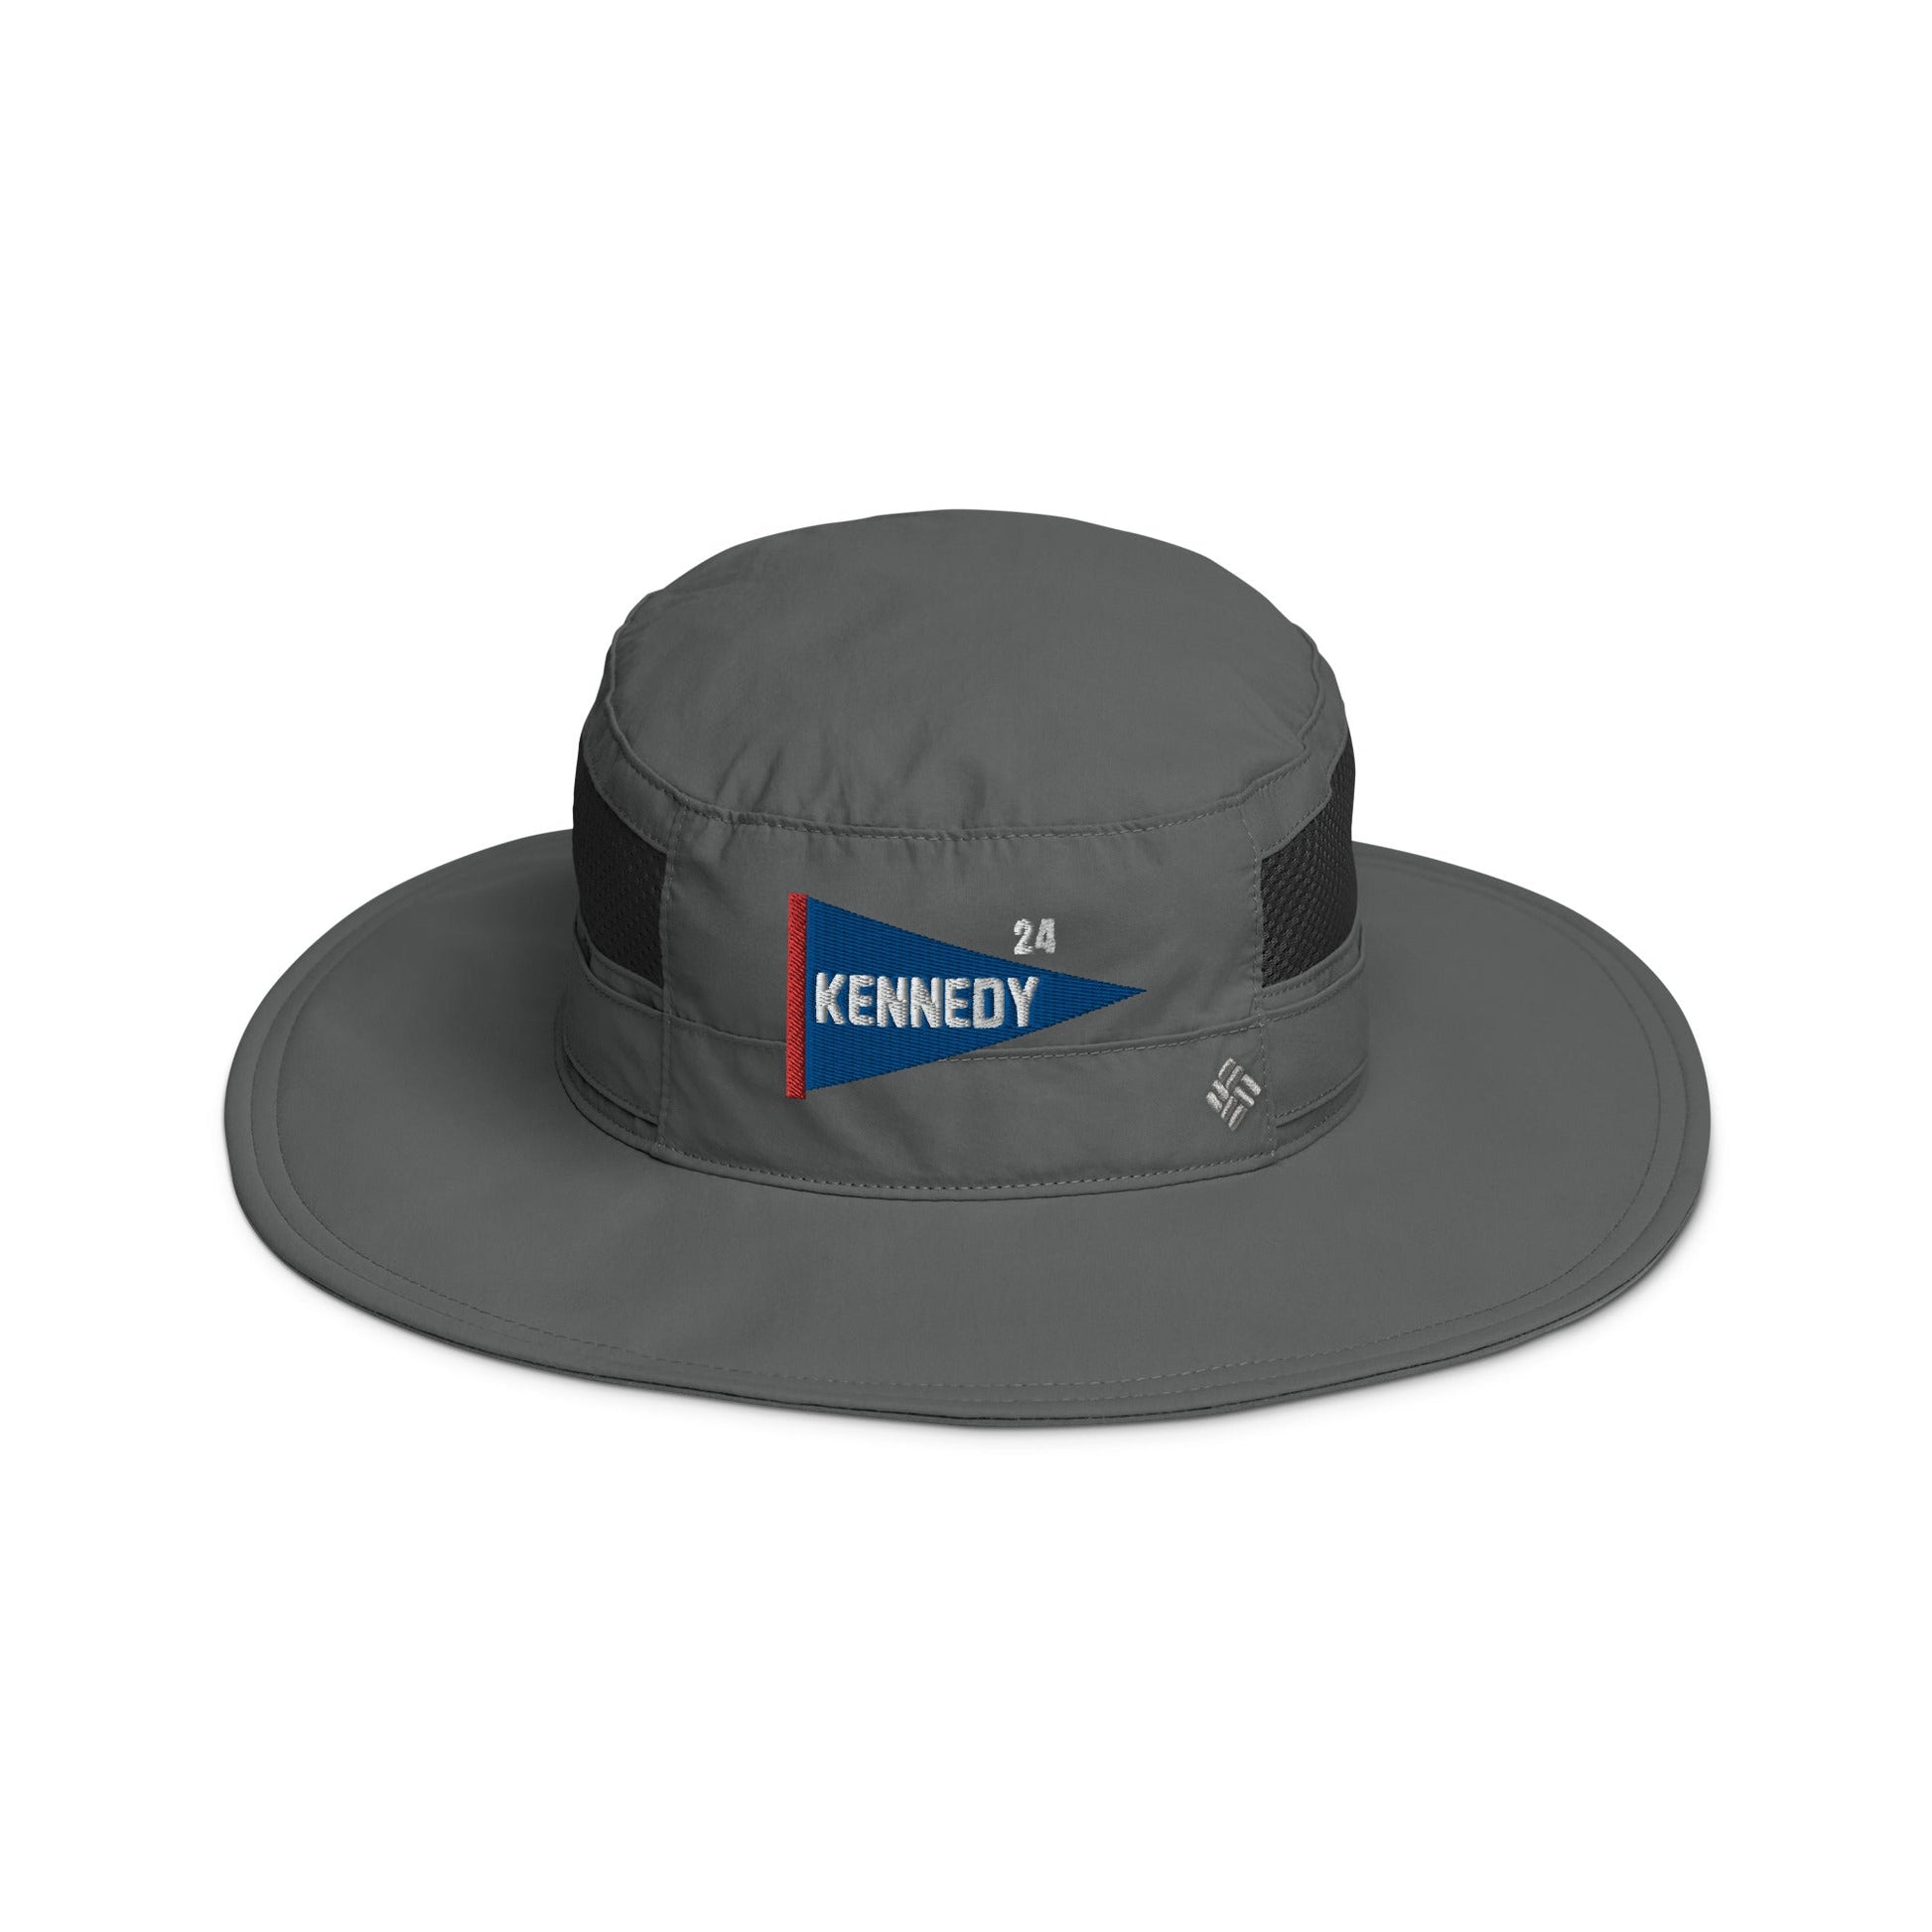 Kennedy 24 Pennant Columbia Booney Hat - TEAM KENNEDY. All rights reserved